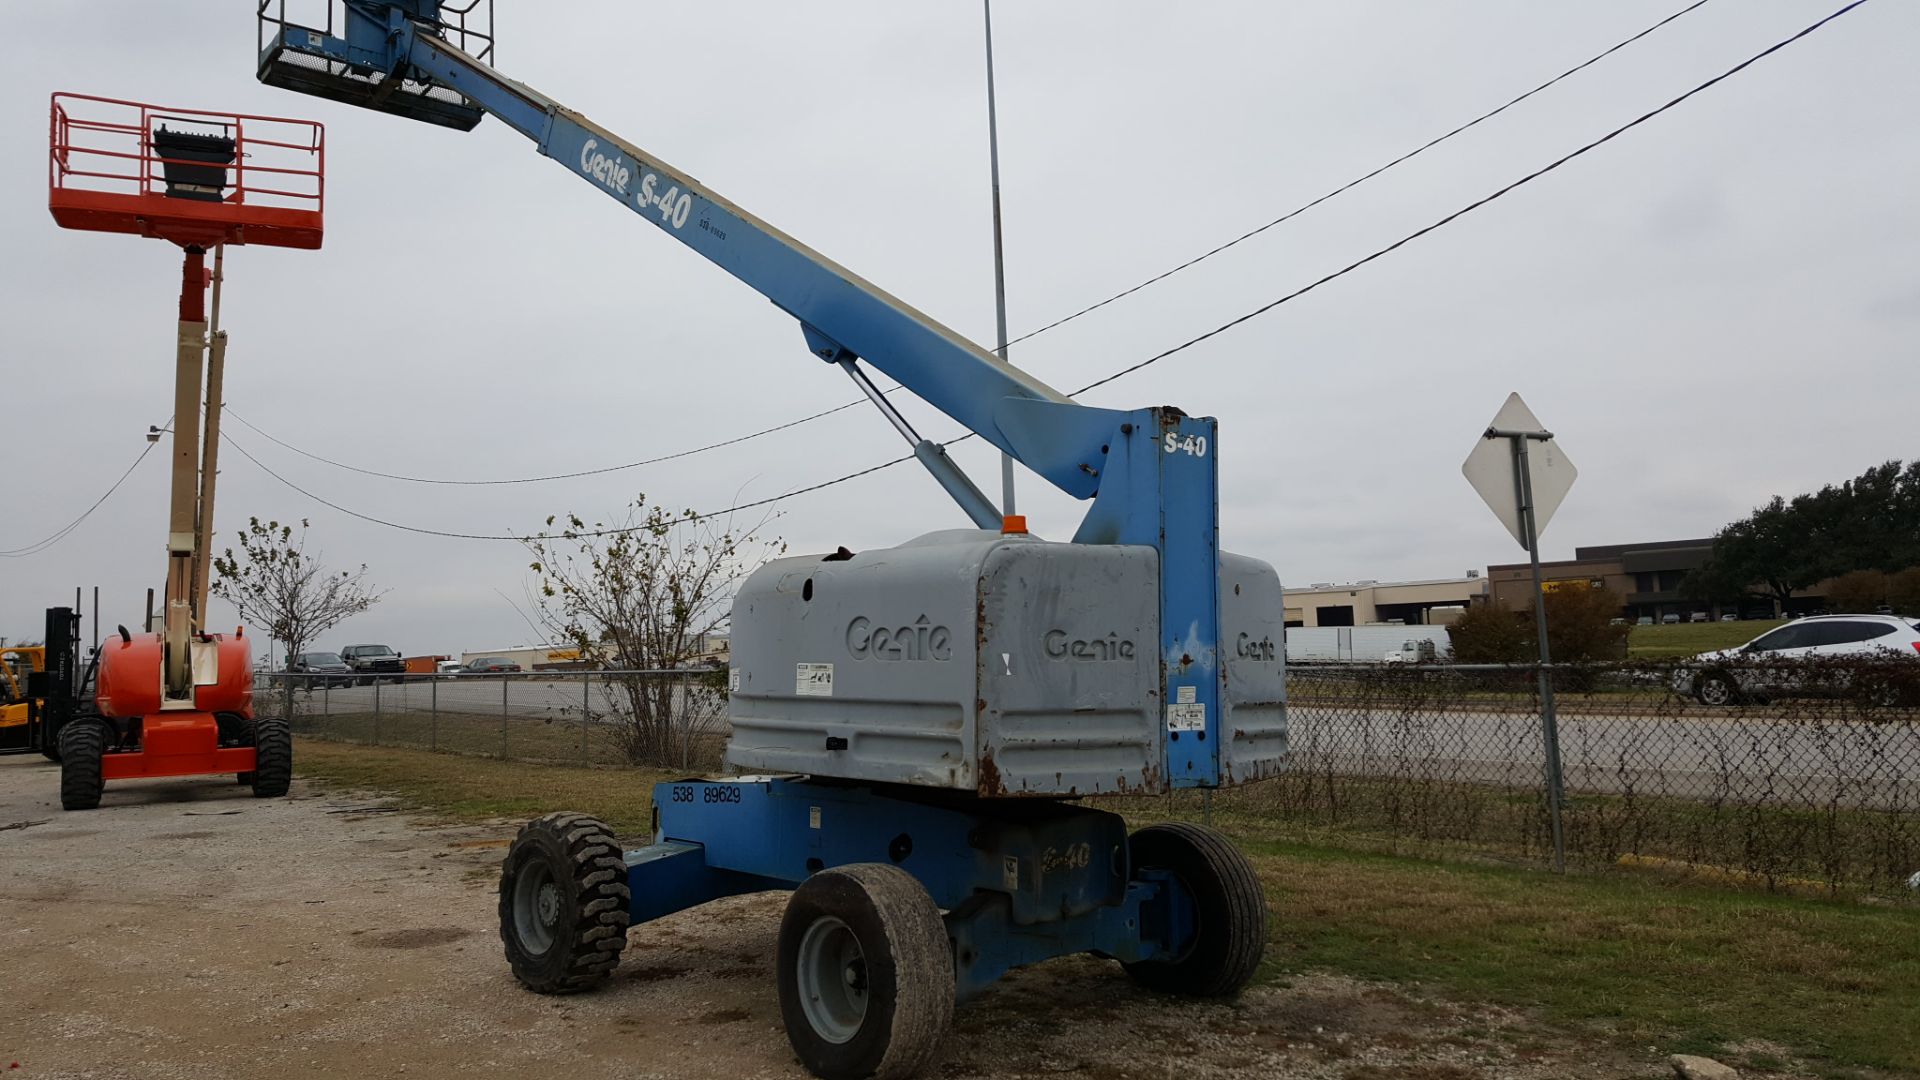 TELESCOPING BOOM MANLIFT, GENIE MDL. S40, new 1998, 40' 2-section boom lift, Ford 4 cyl. LPG engine, - Image 3 of 6